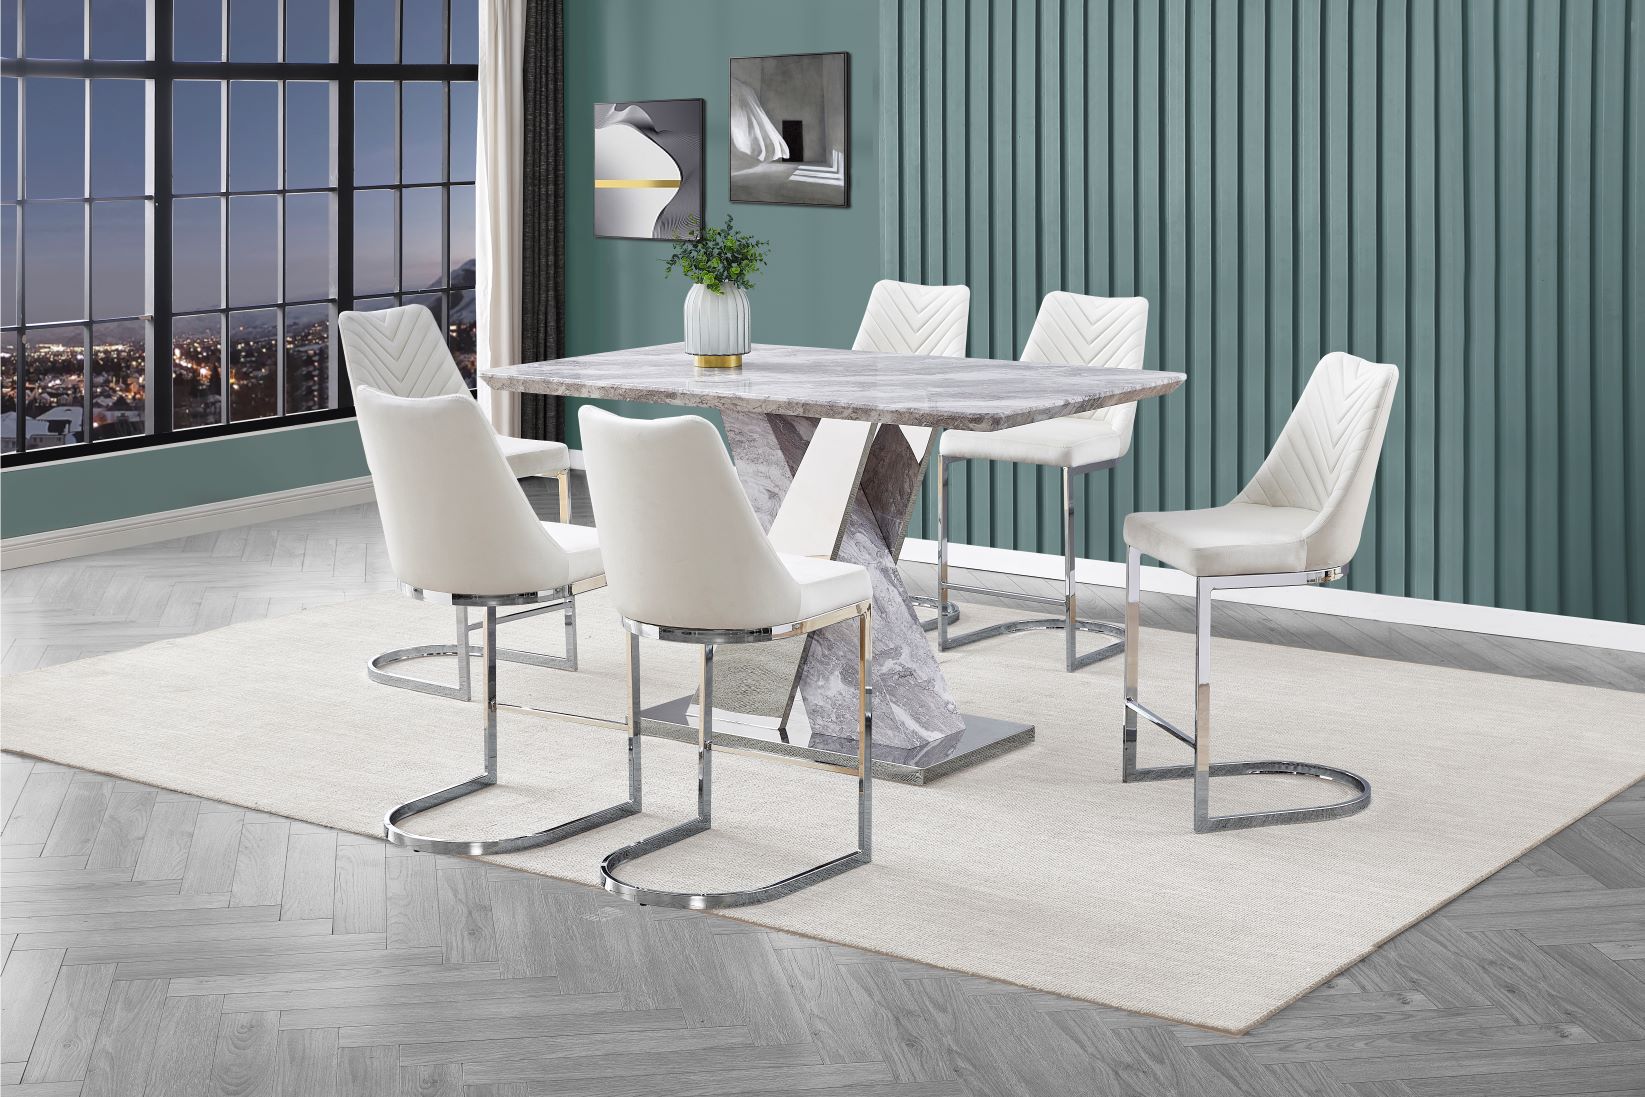 D135-7PC 7 pc Orren ellis lieselore modern style faux marble top counter height dining table set. ***March Madness Sale Going On Now*** Discounted Price When You Add To Cart up to 35% off.Click Acima Leasing Easy Lease and Application Process at ambfurniture.com